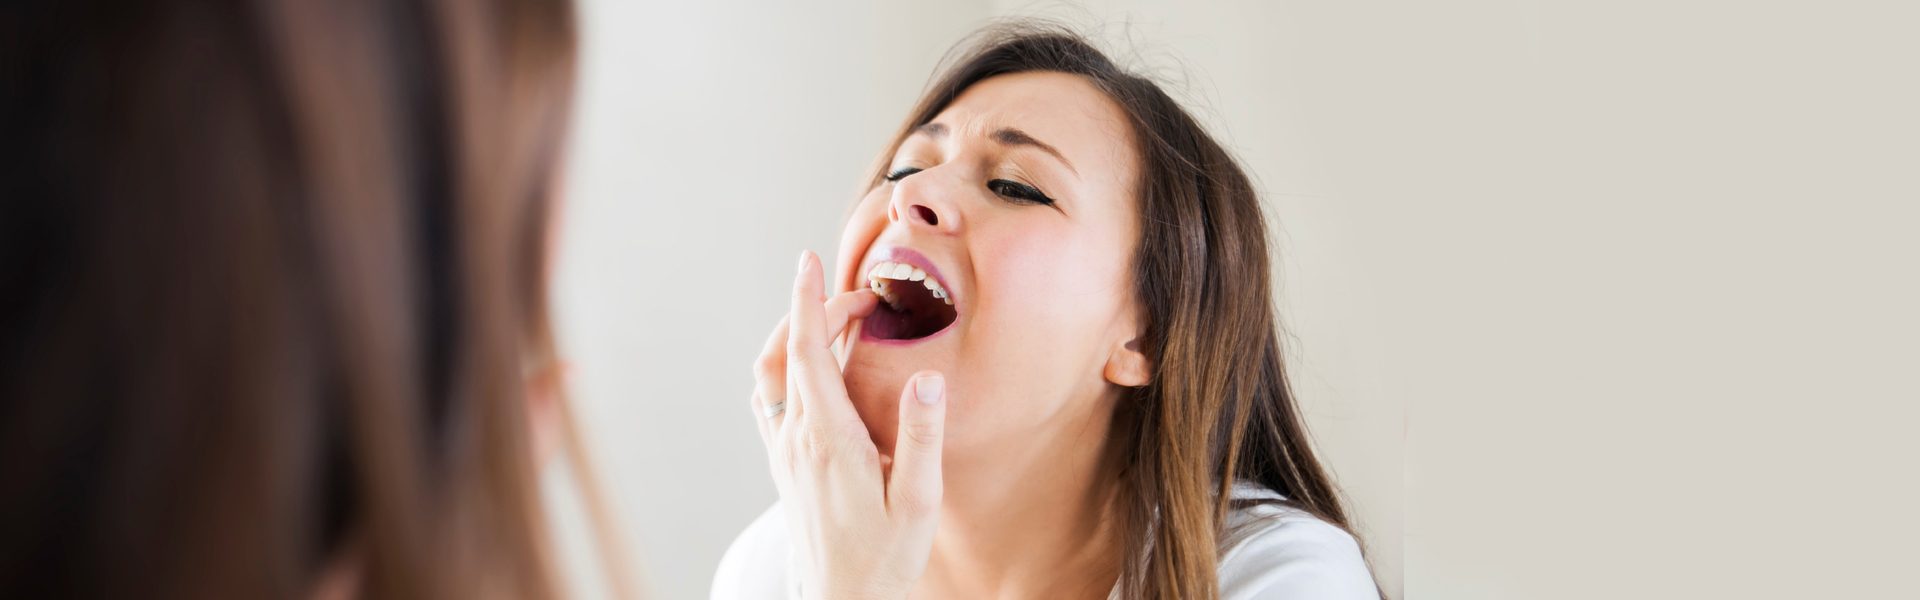 Tooth Extraction as a Remedy for Toothache